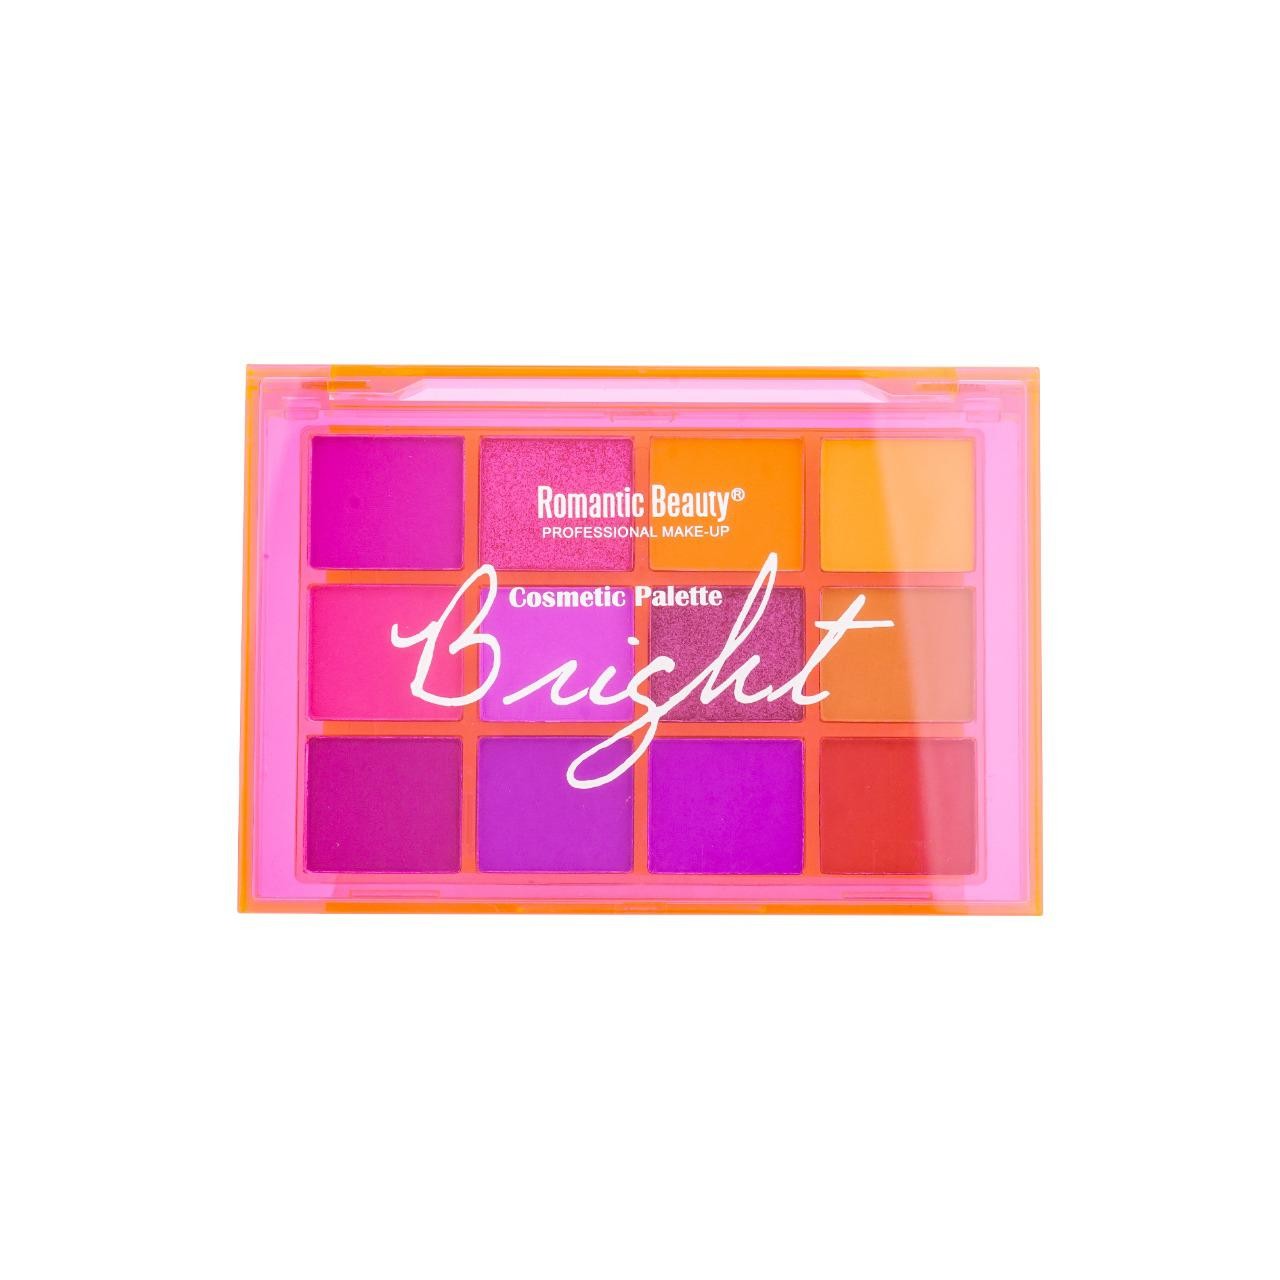 PACK 12 UNIDADES. SOMBRA. BRIGHT